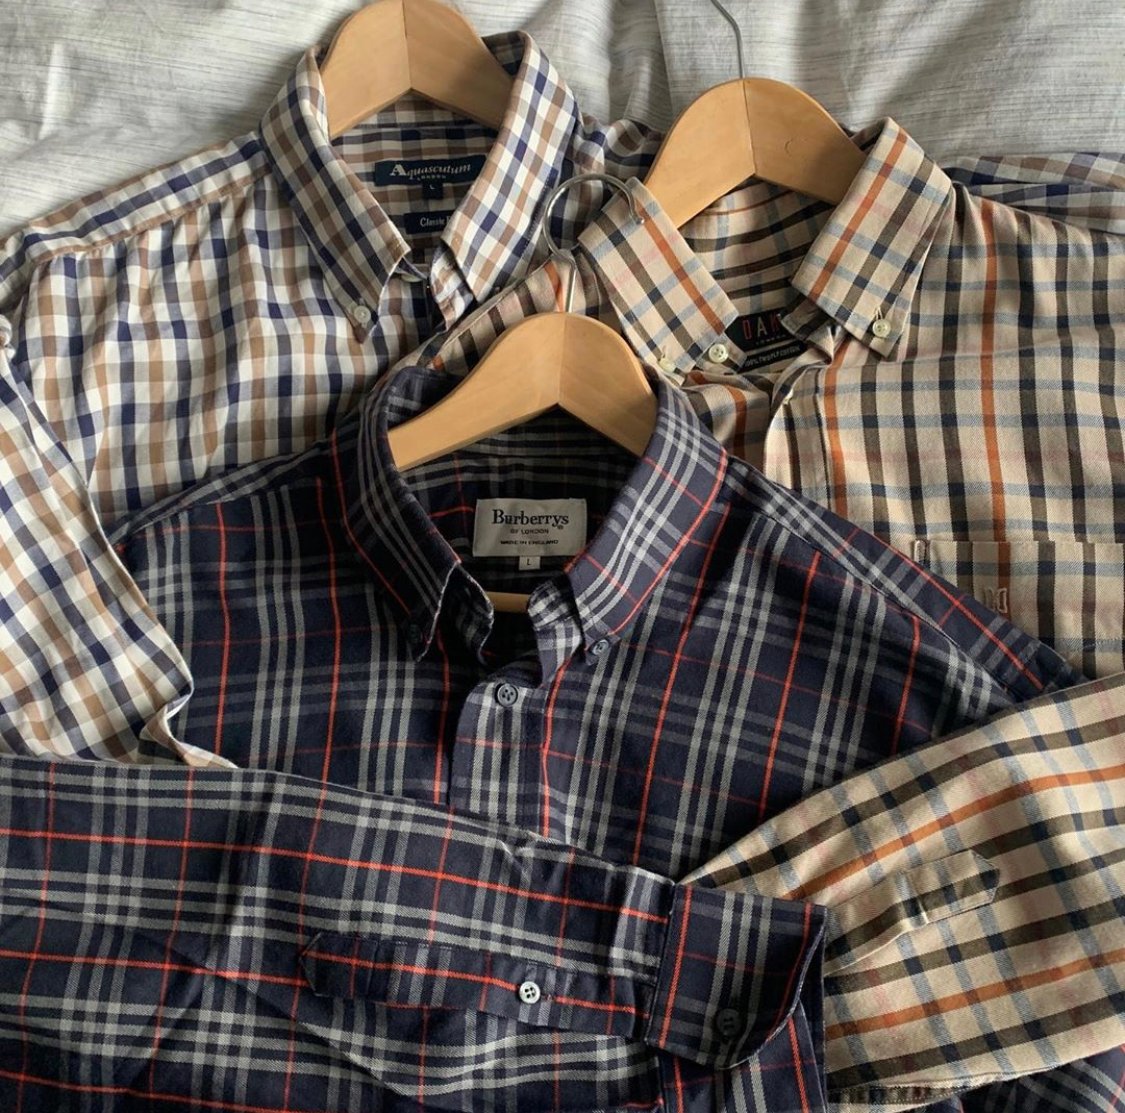 The Casuals Directory on Twitter: "Aquascutum, Burberry and Daks Pic  Credit: @philsparrowhawk instagram https://t.co/DqugY9Dp2T" / Twitter